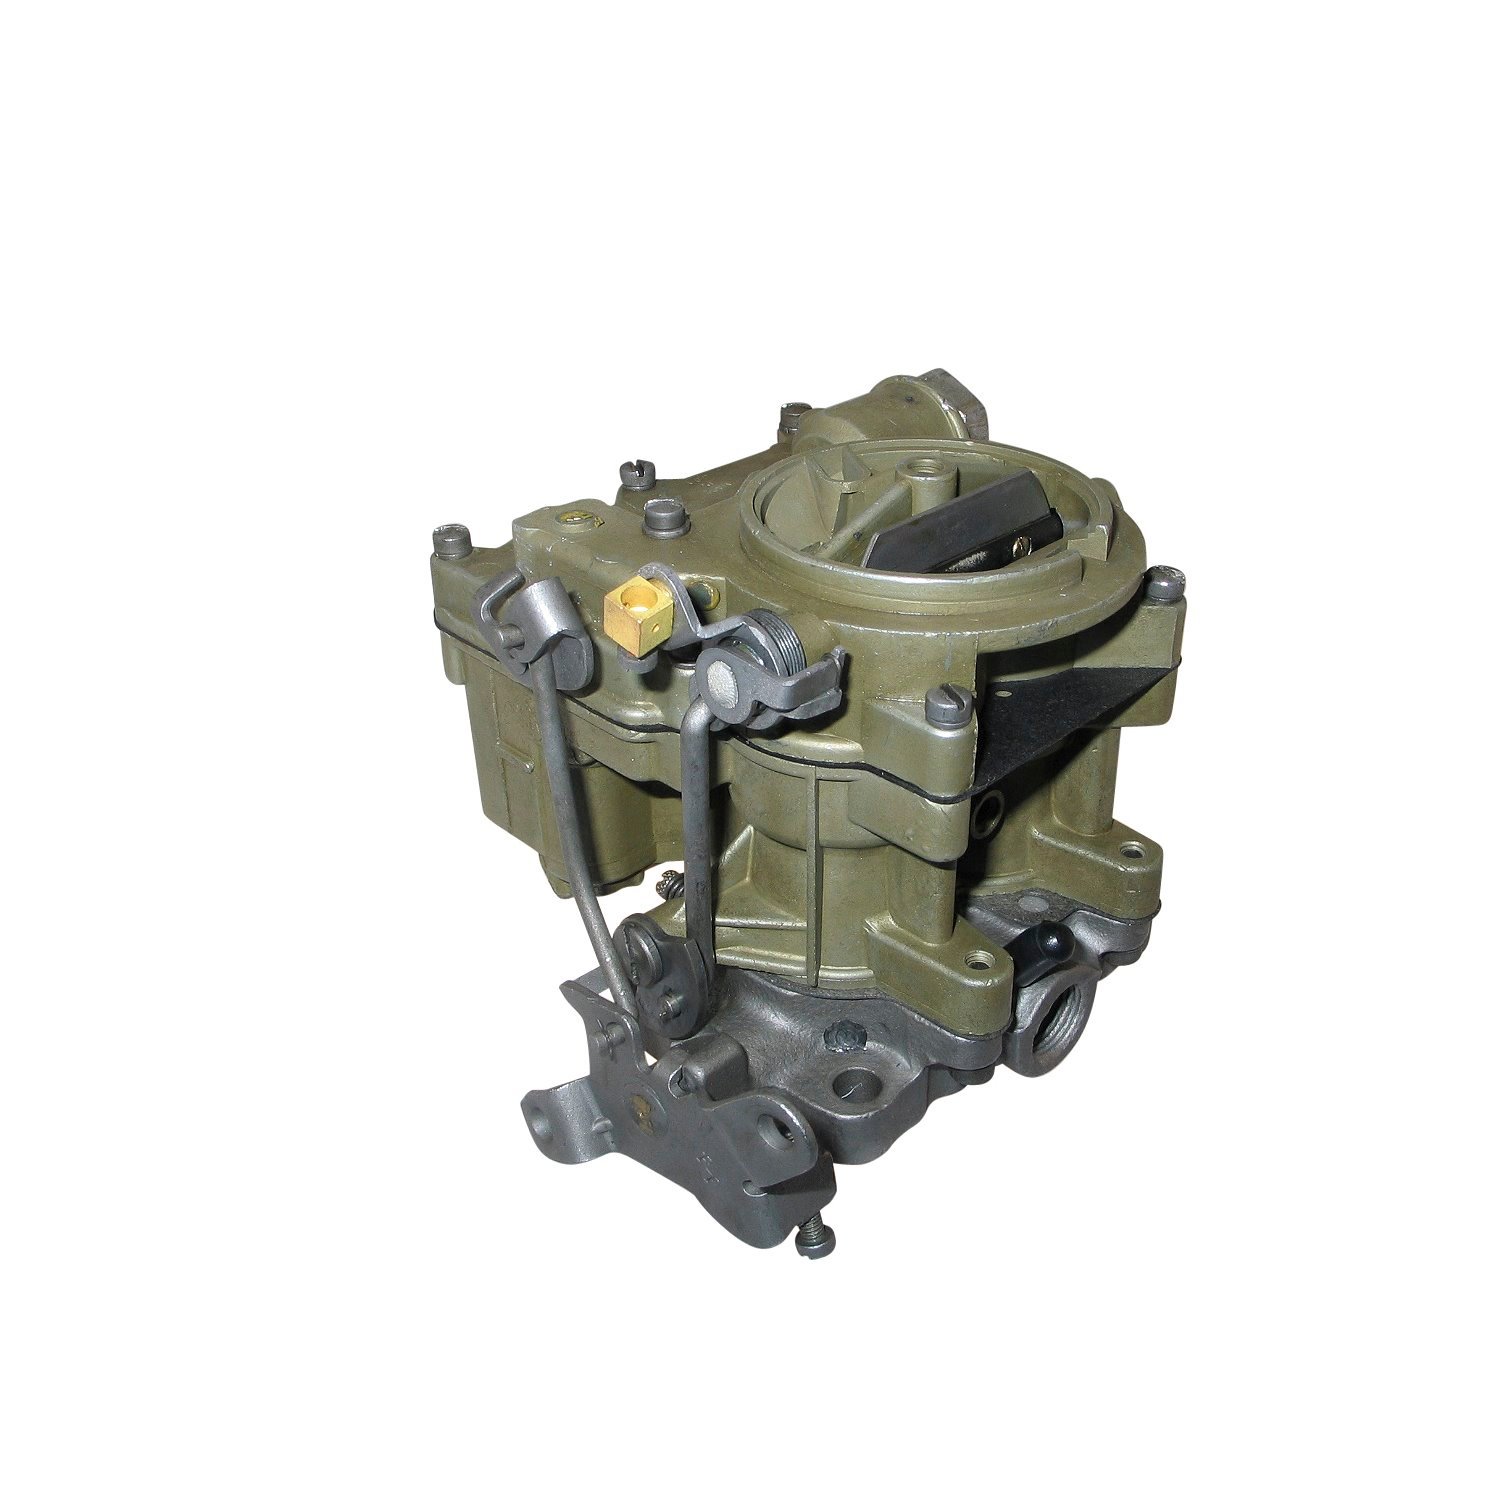 3-3187 Rochester Remanufactured Carburetor, 2G-Style